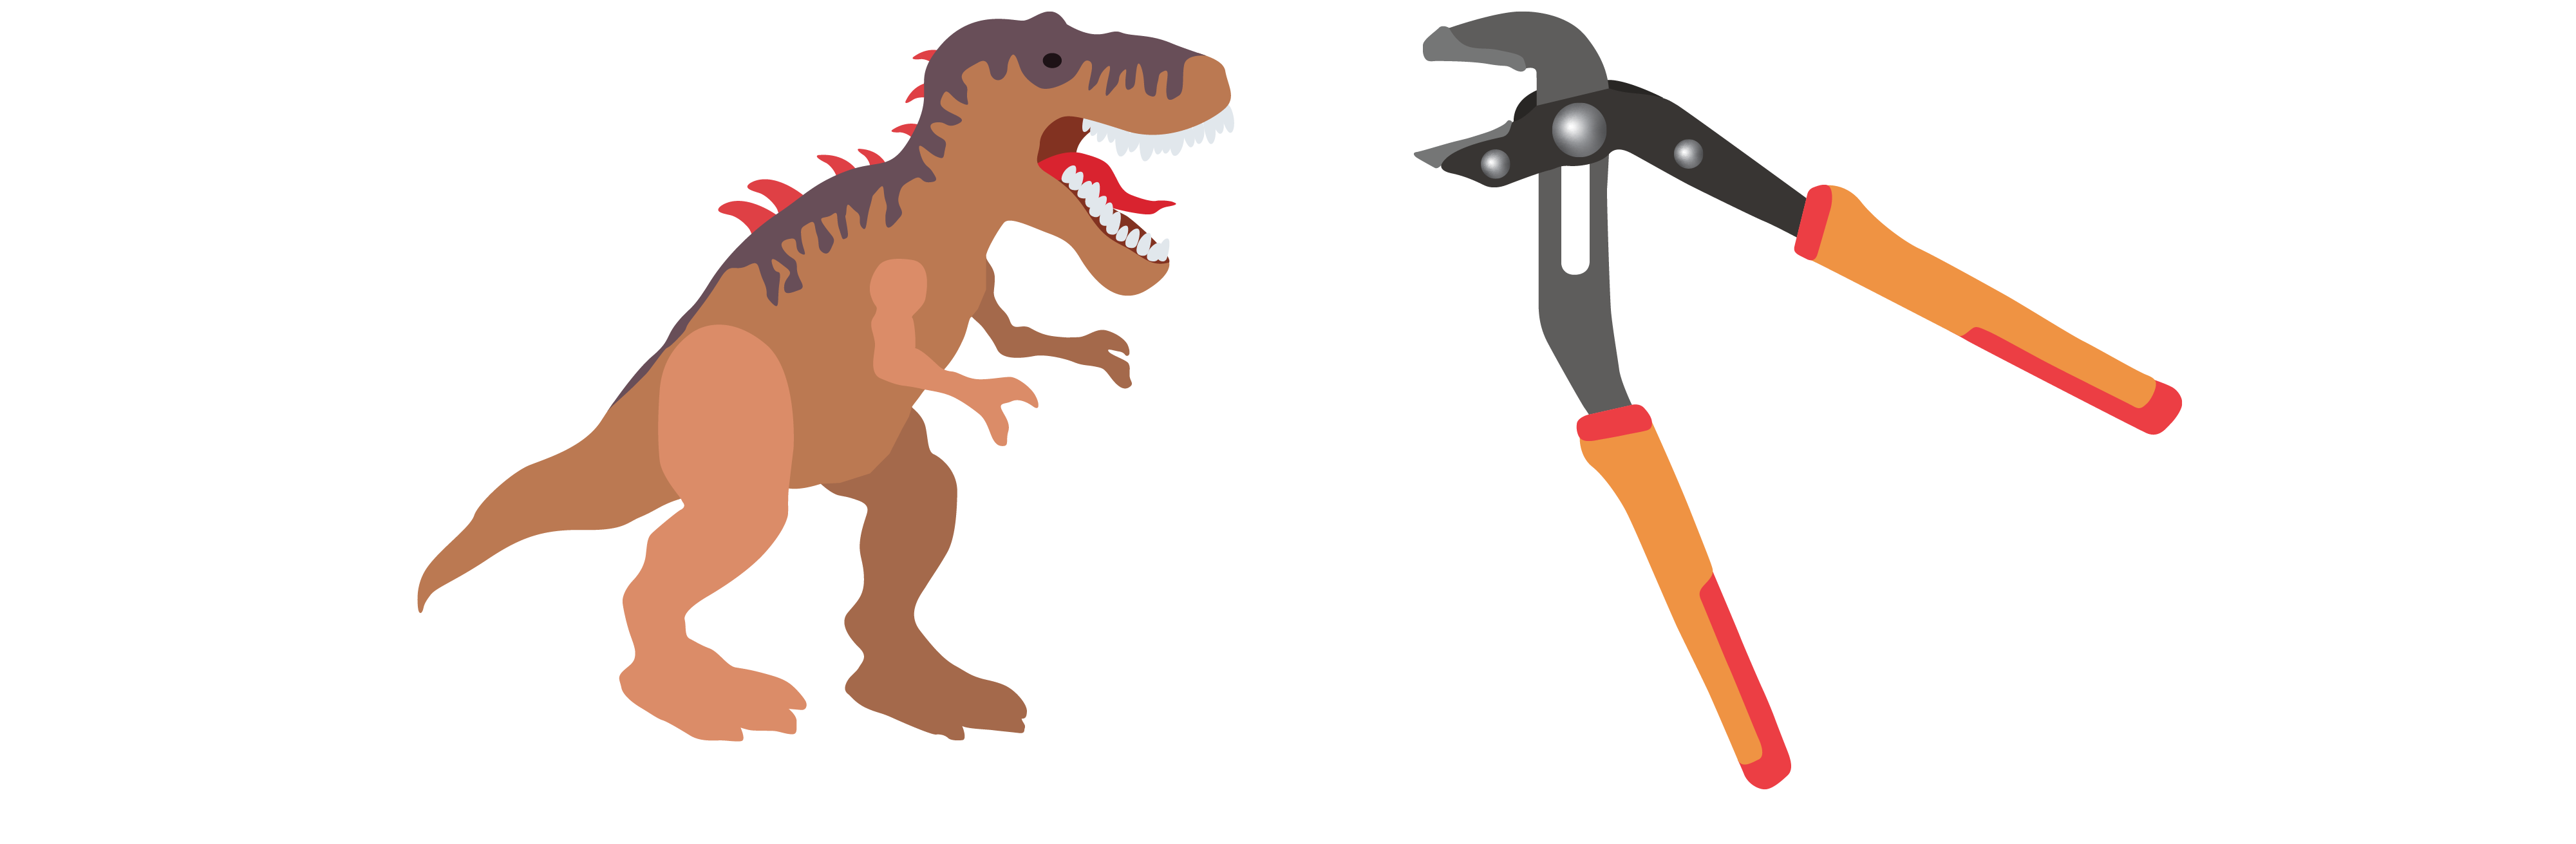 On the left, a brown and red t-rex dinosaur stands with its short arms extended. On the right, red and orange metallic groove joint plyers face the dinosaur, showing their similar forms.